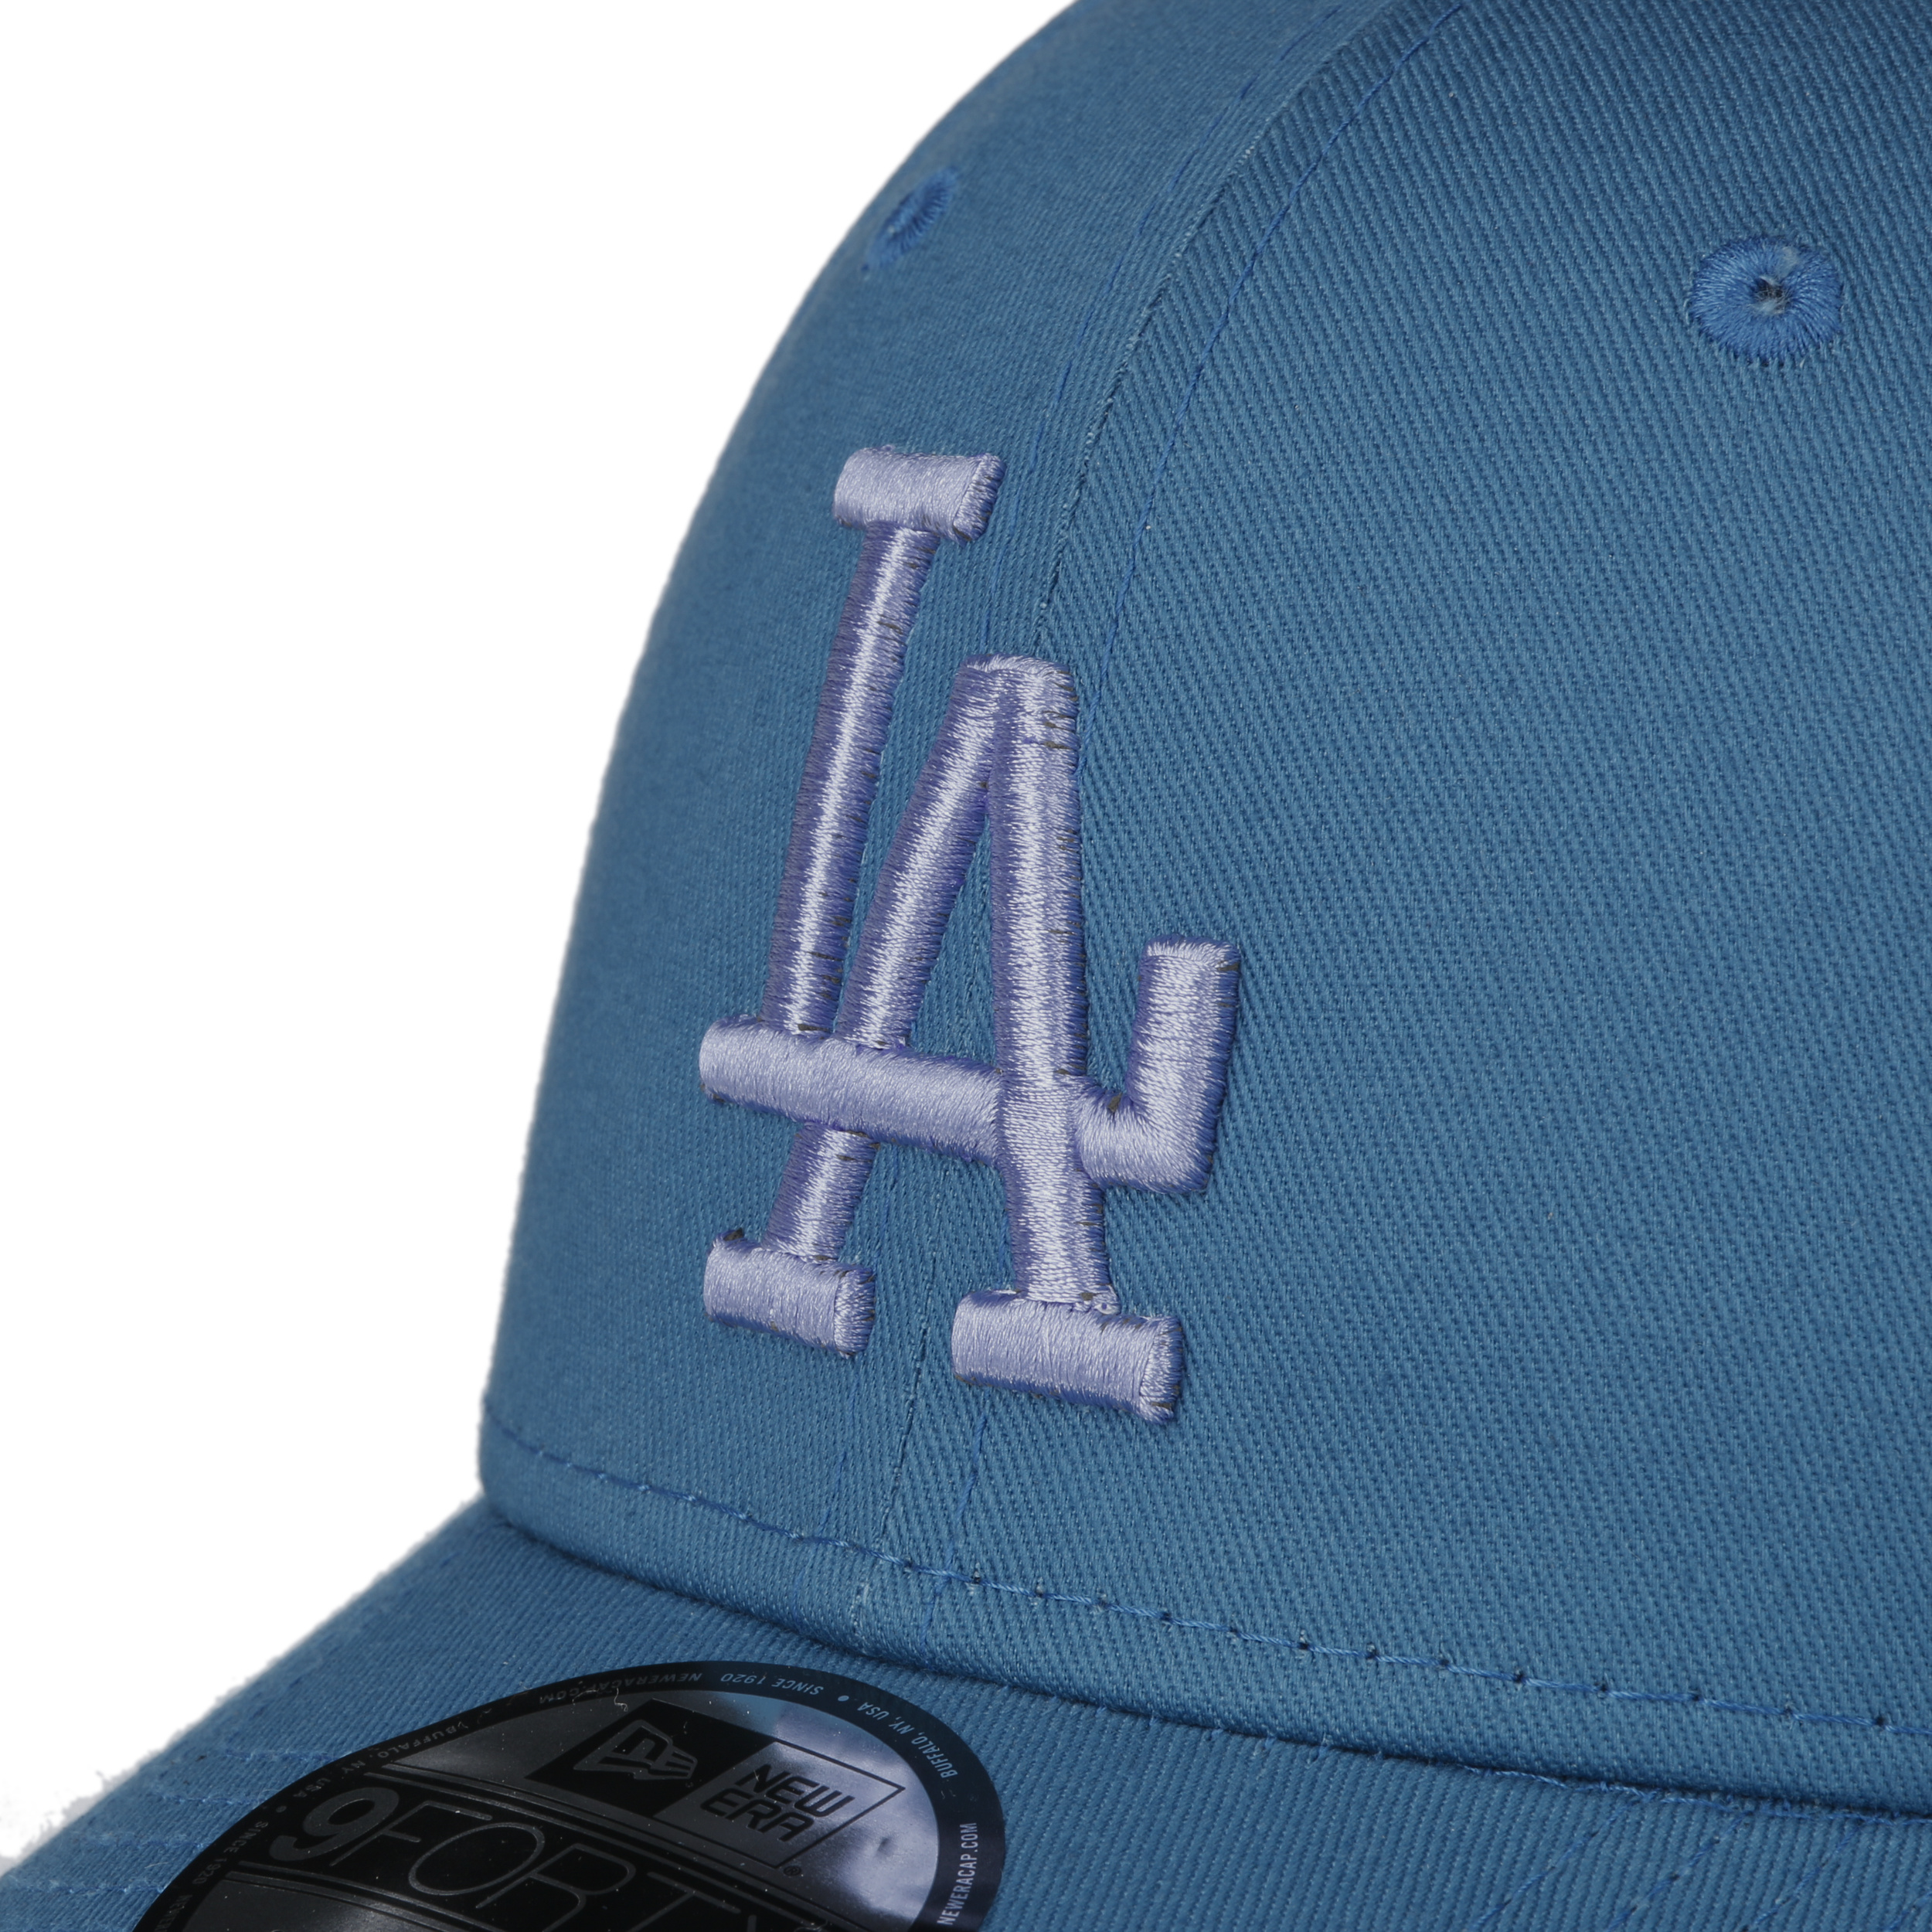 New Era League Essential 9Forty Los Angeles Dodgers Cap (blue/yellow)